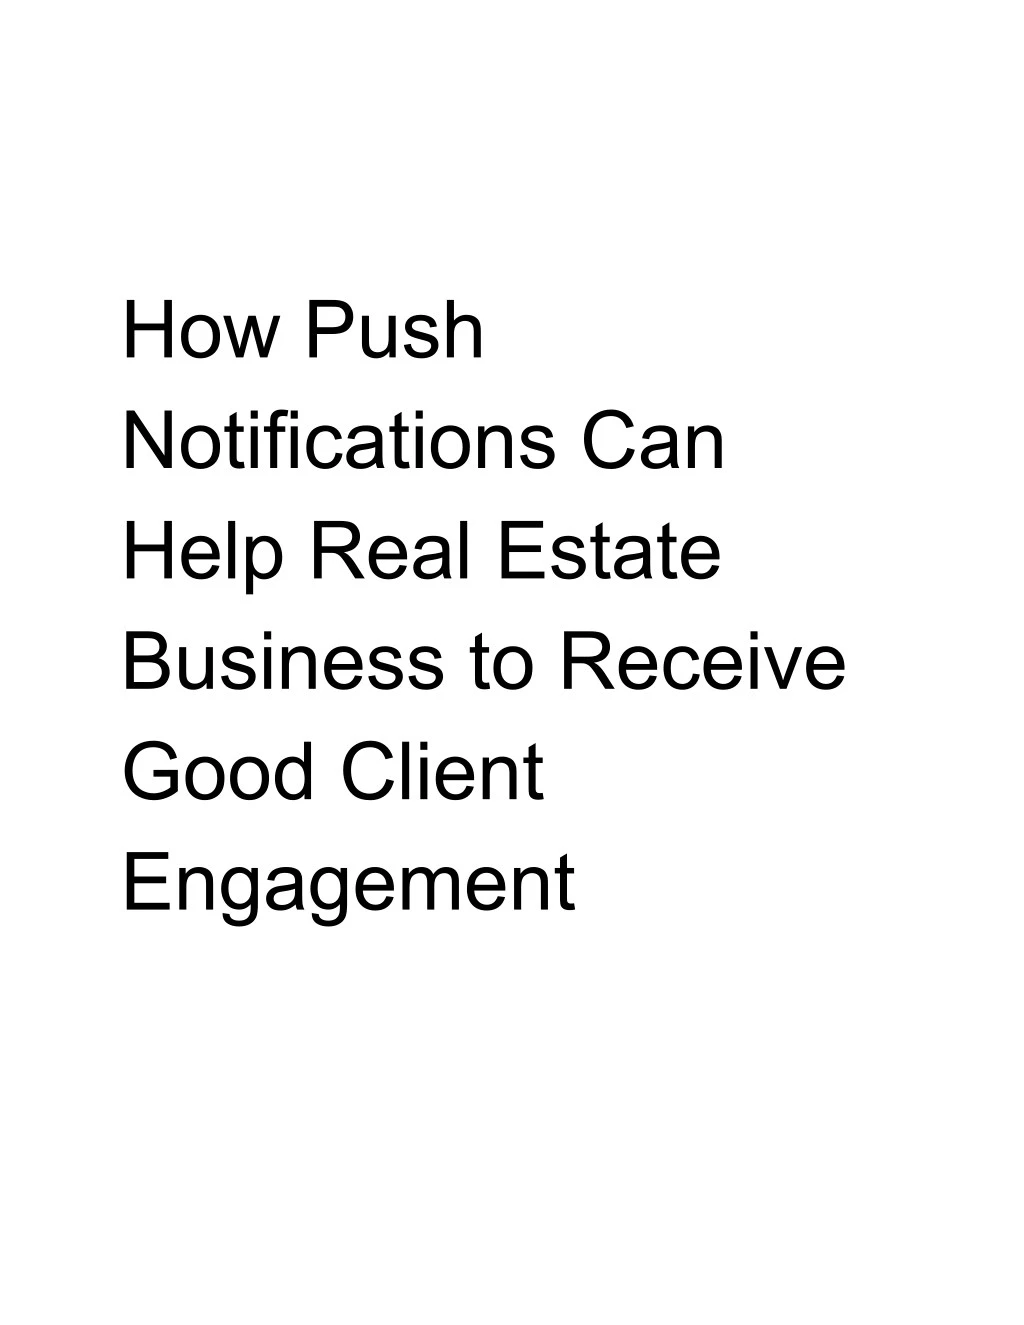 how push notifications can help real estate